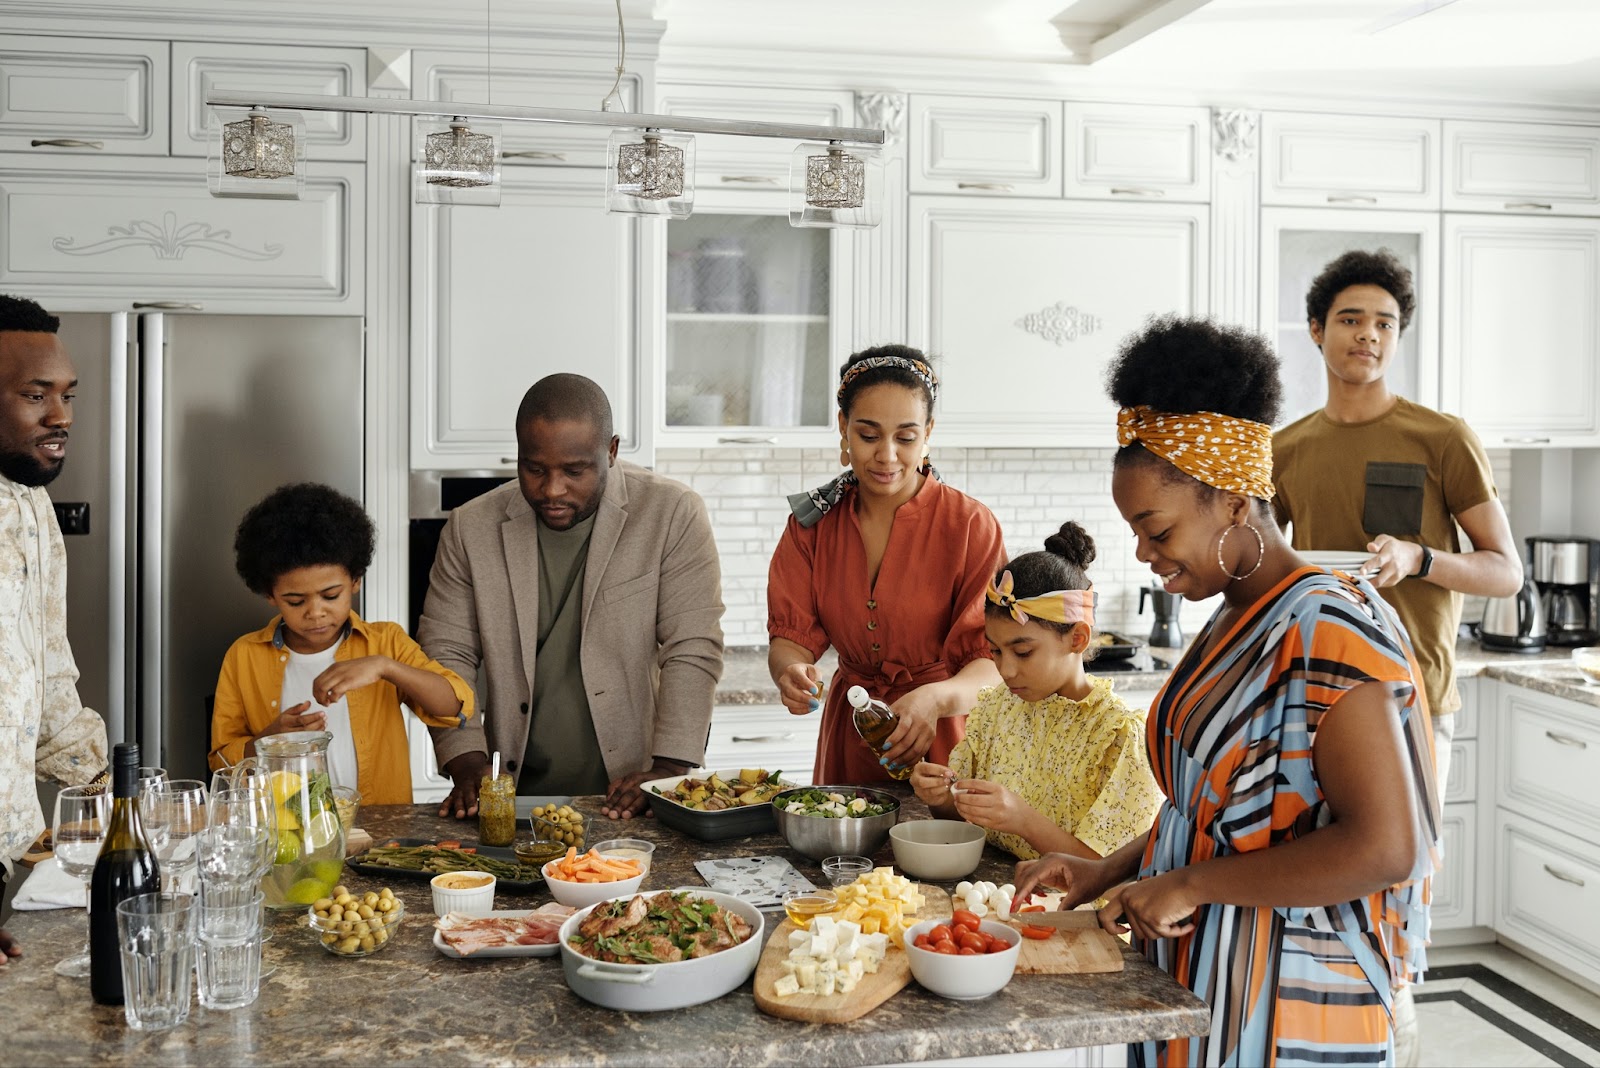 A family, including two adult men, one adult woman, two teenagers, and two younger children, gather around a kitchen island to prepare food.